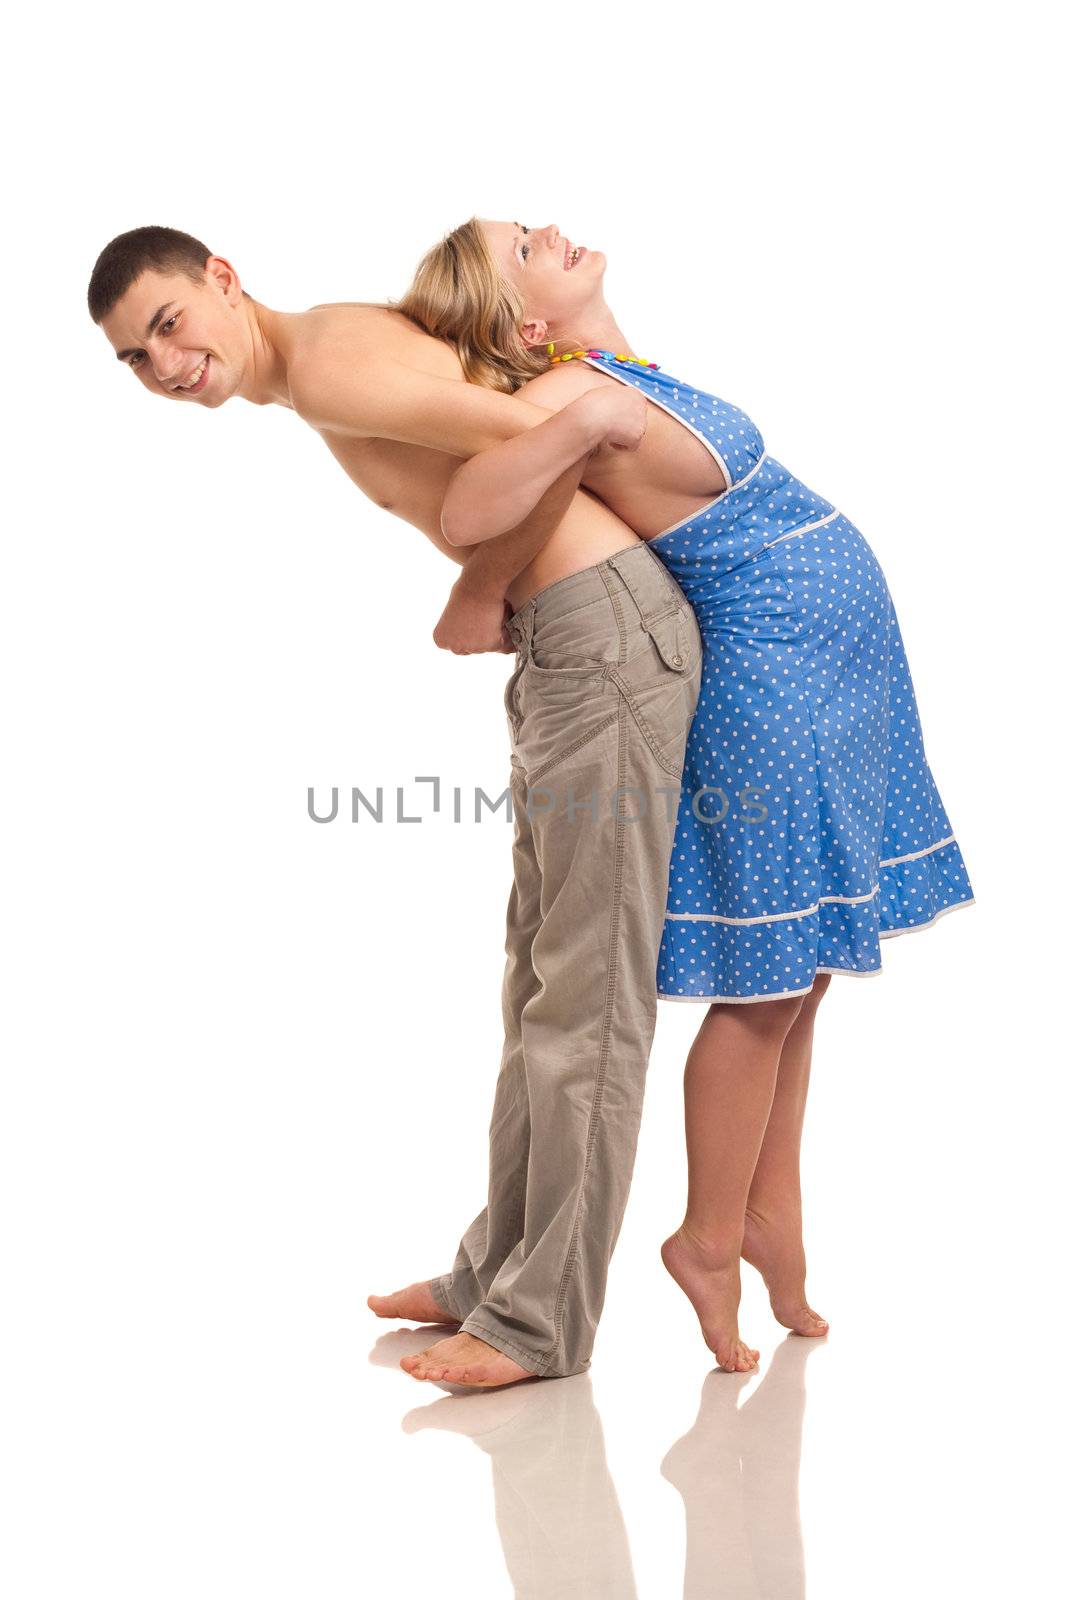 Pregnant woman with her husband doing exercises. Studio shoot on white.